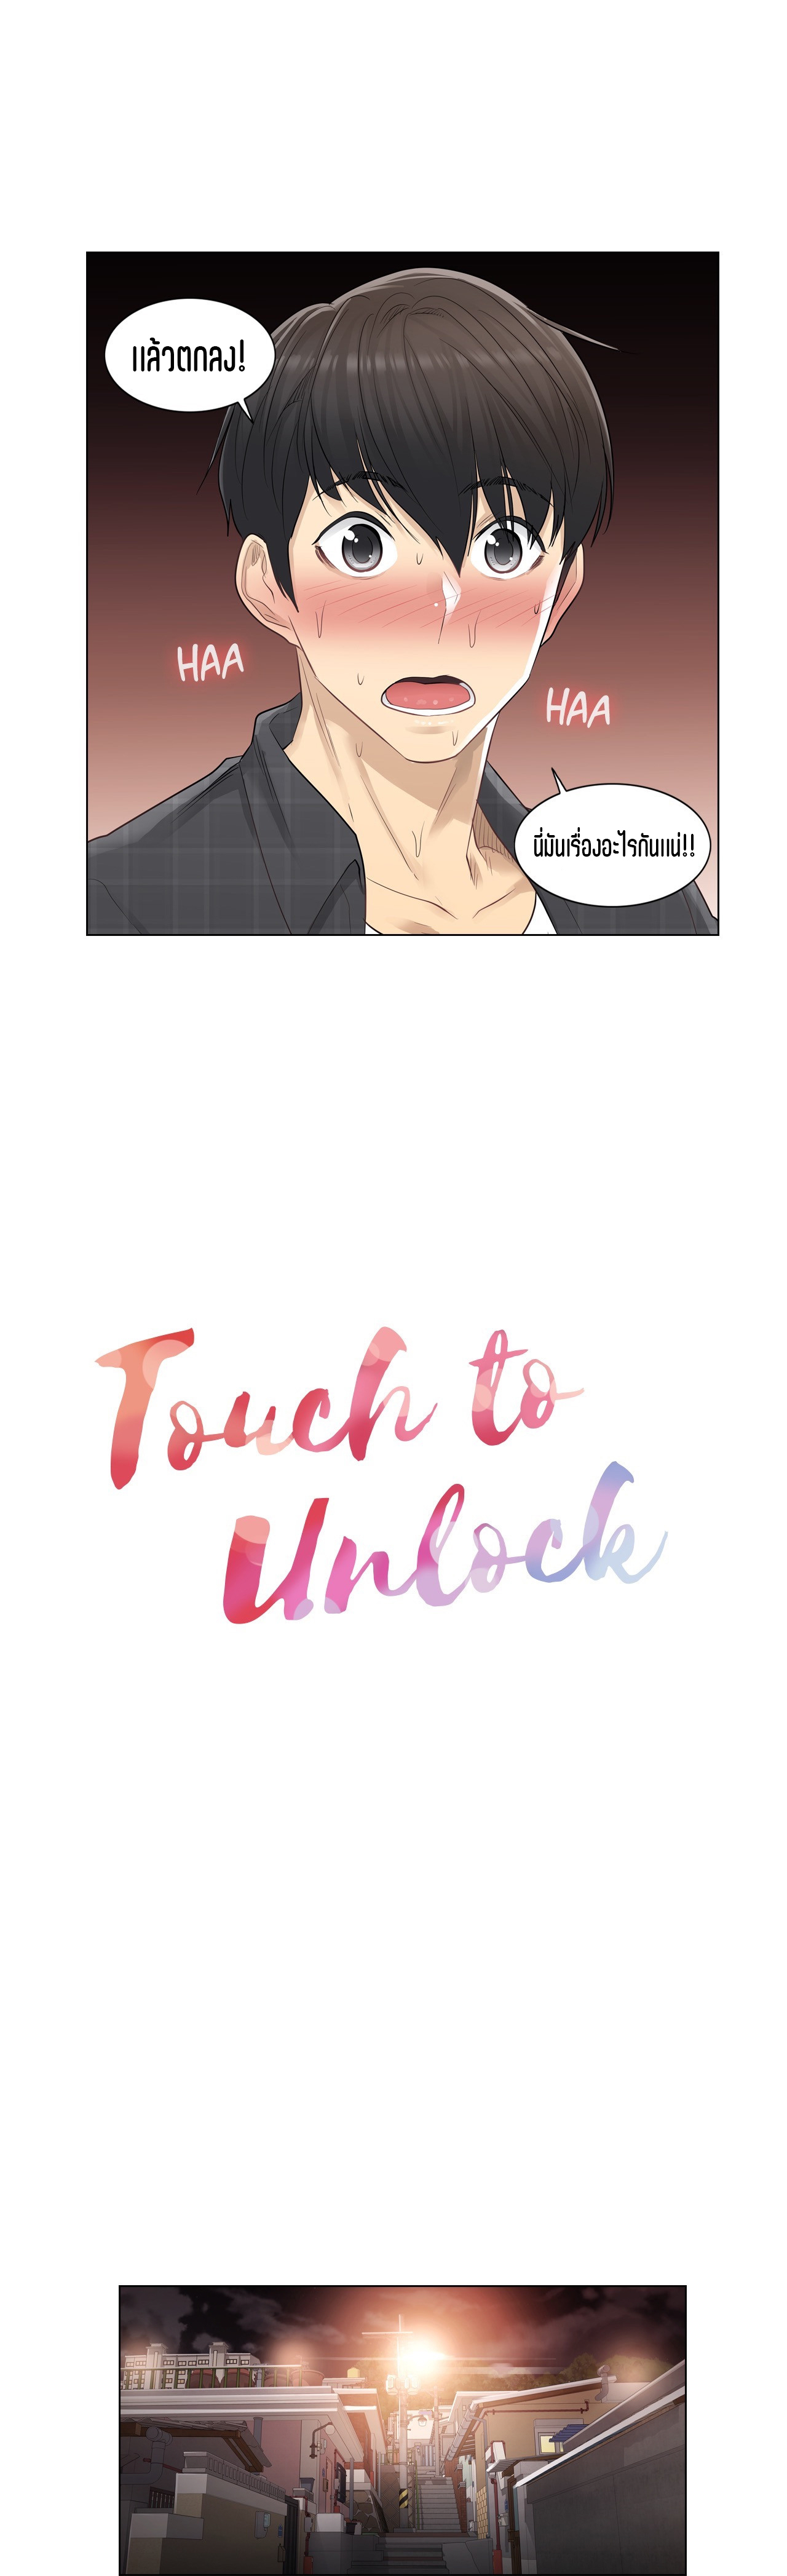 Touch To Unlock